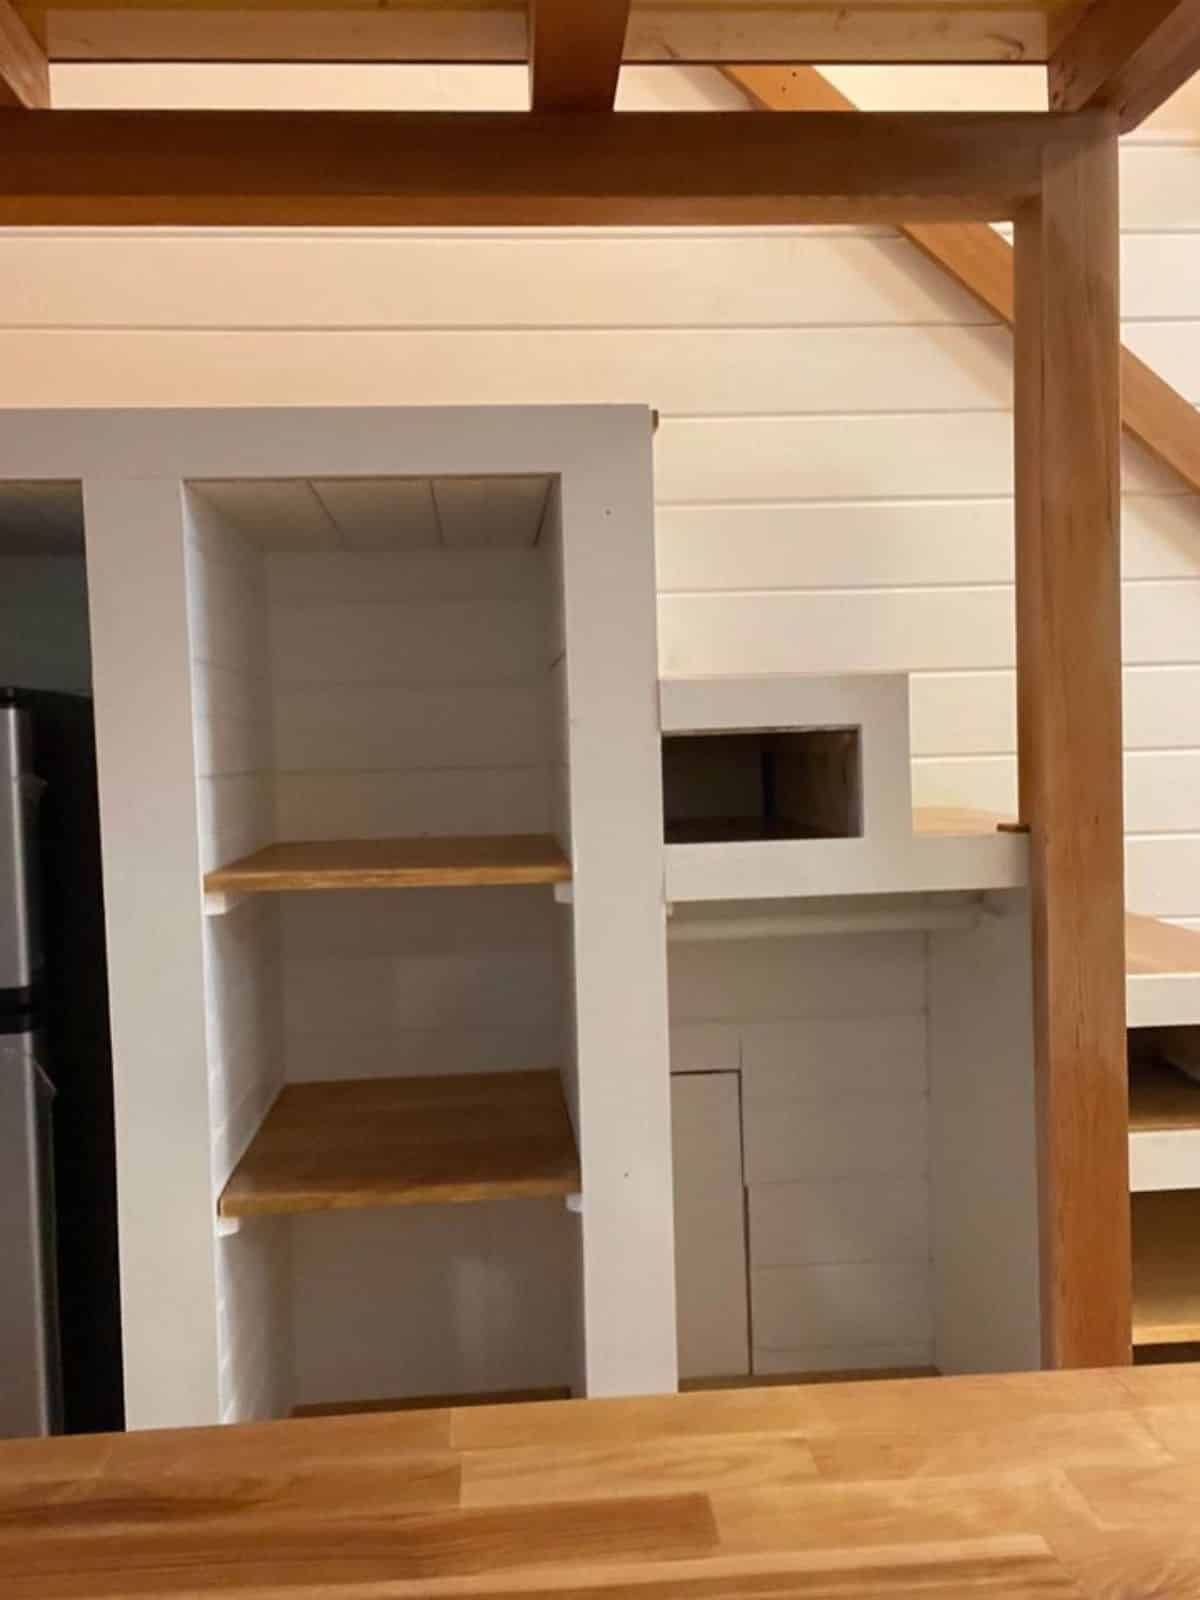 Storage cabinets underneath the stairs